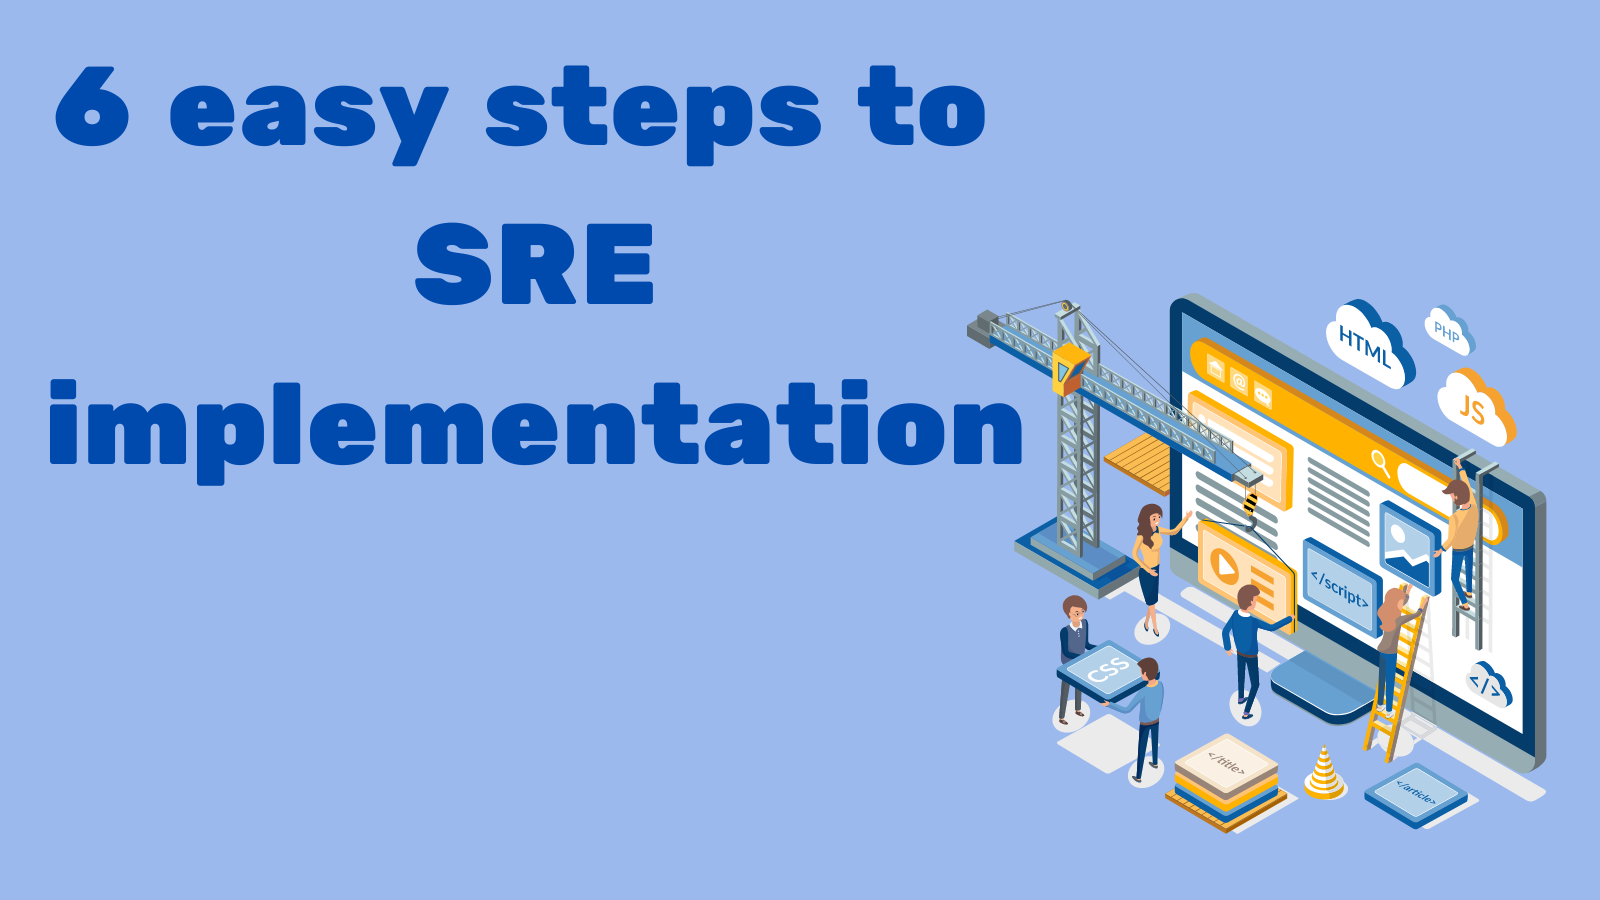 Six easy steps to SRE implementation